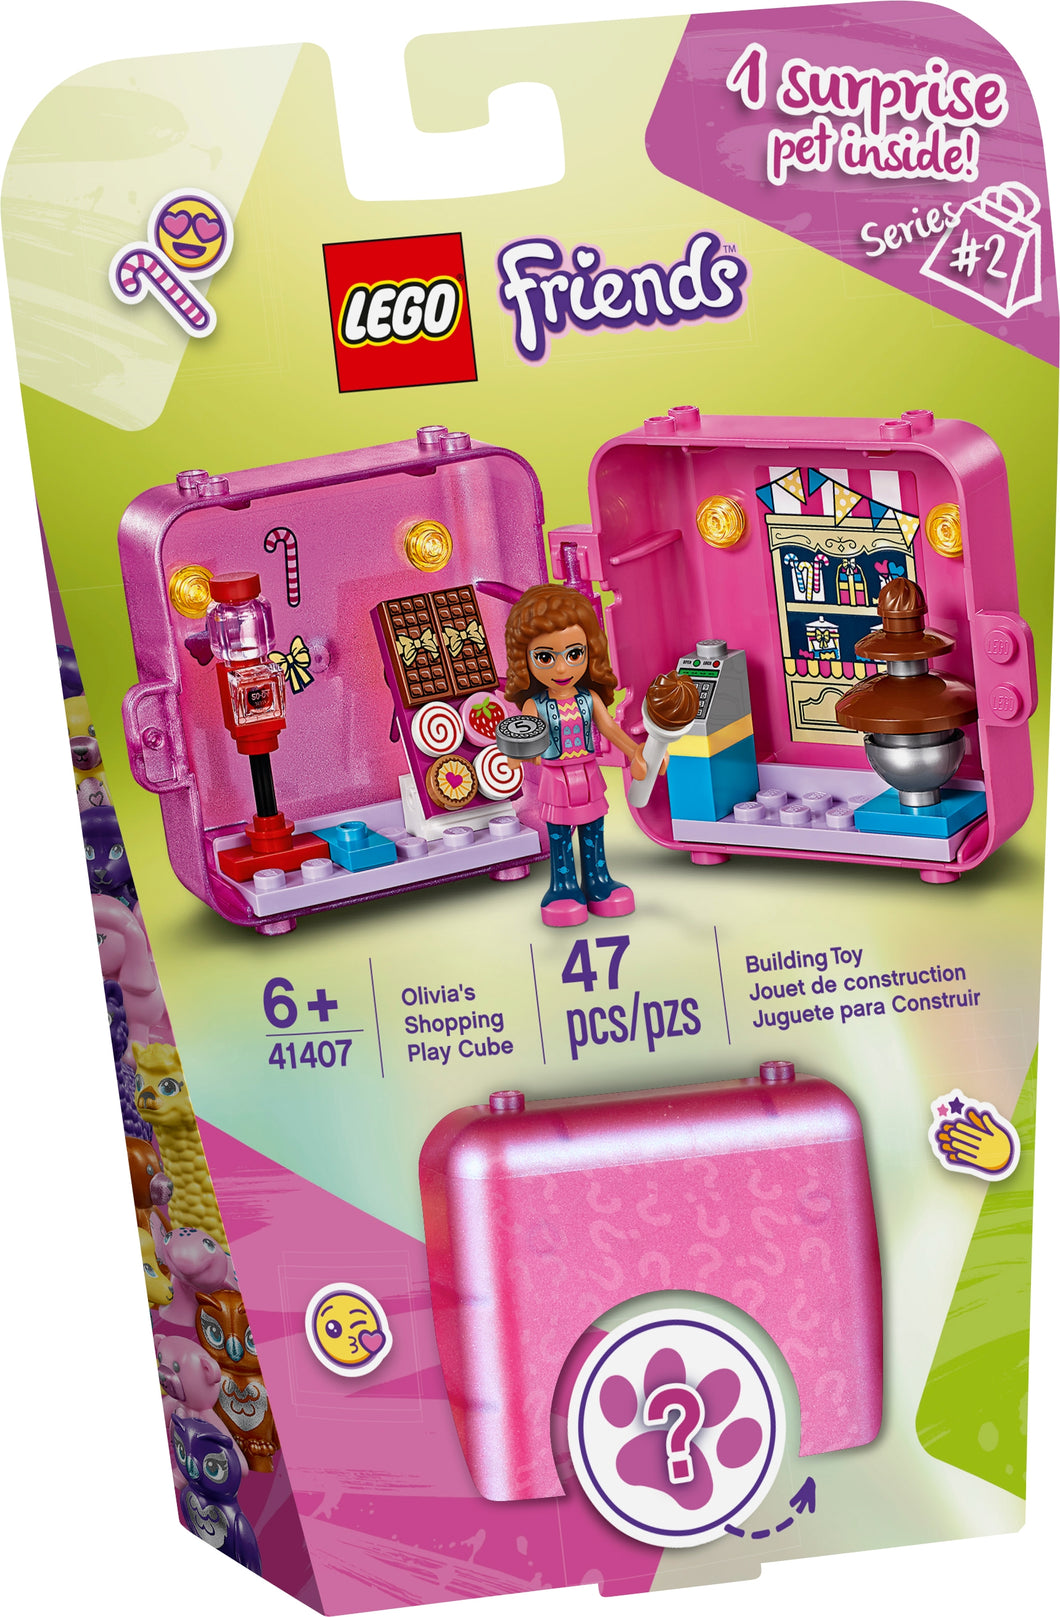 LEGO Friends 41407 Olivias Shopping Play Cube